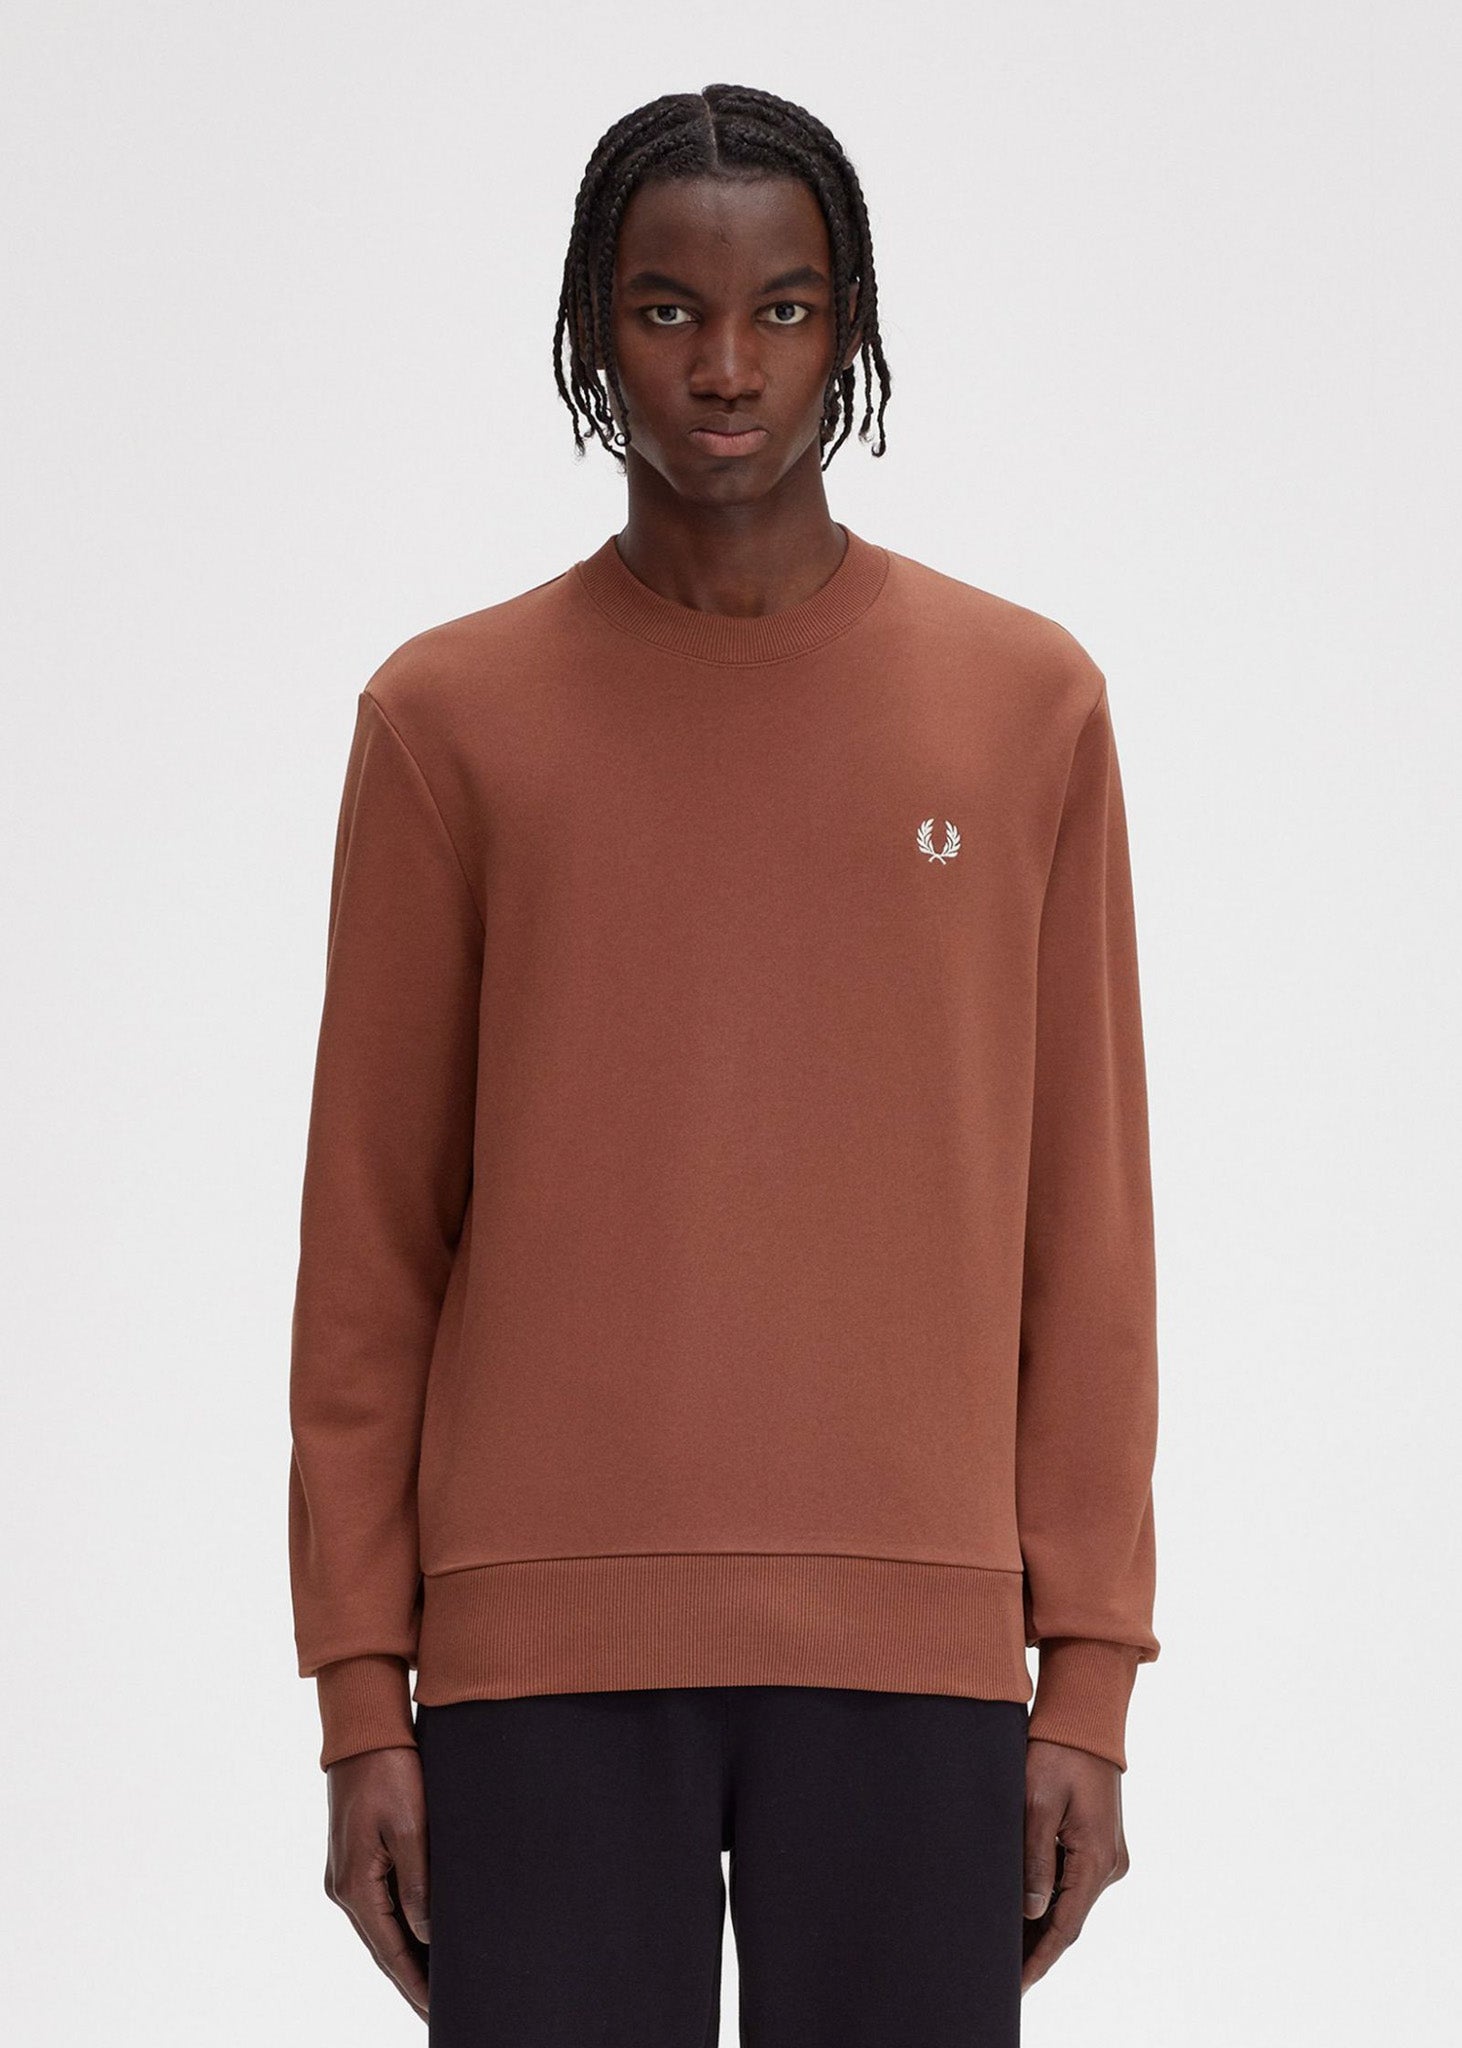 Fred Perry Truien  Rave graphic sweatshirt - whisky brown 